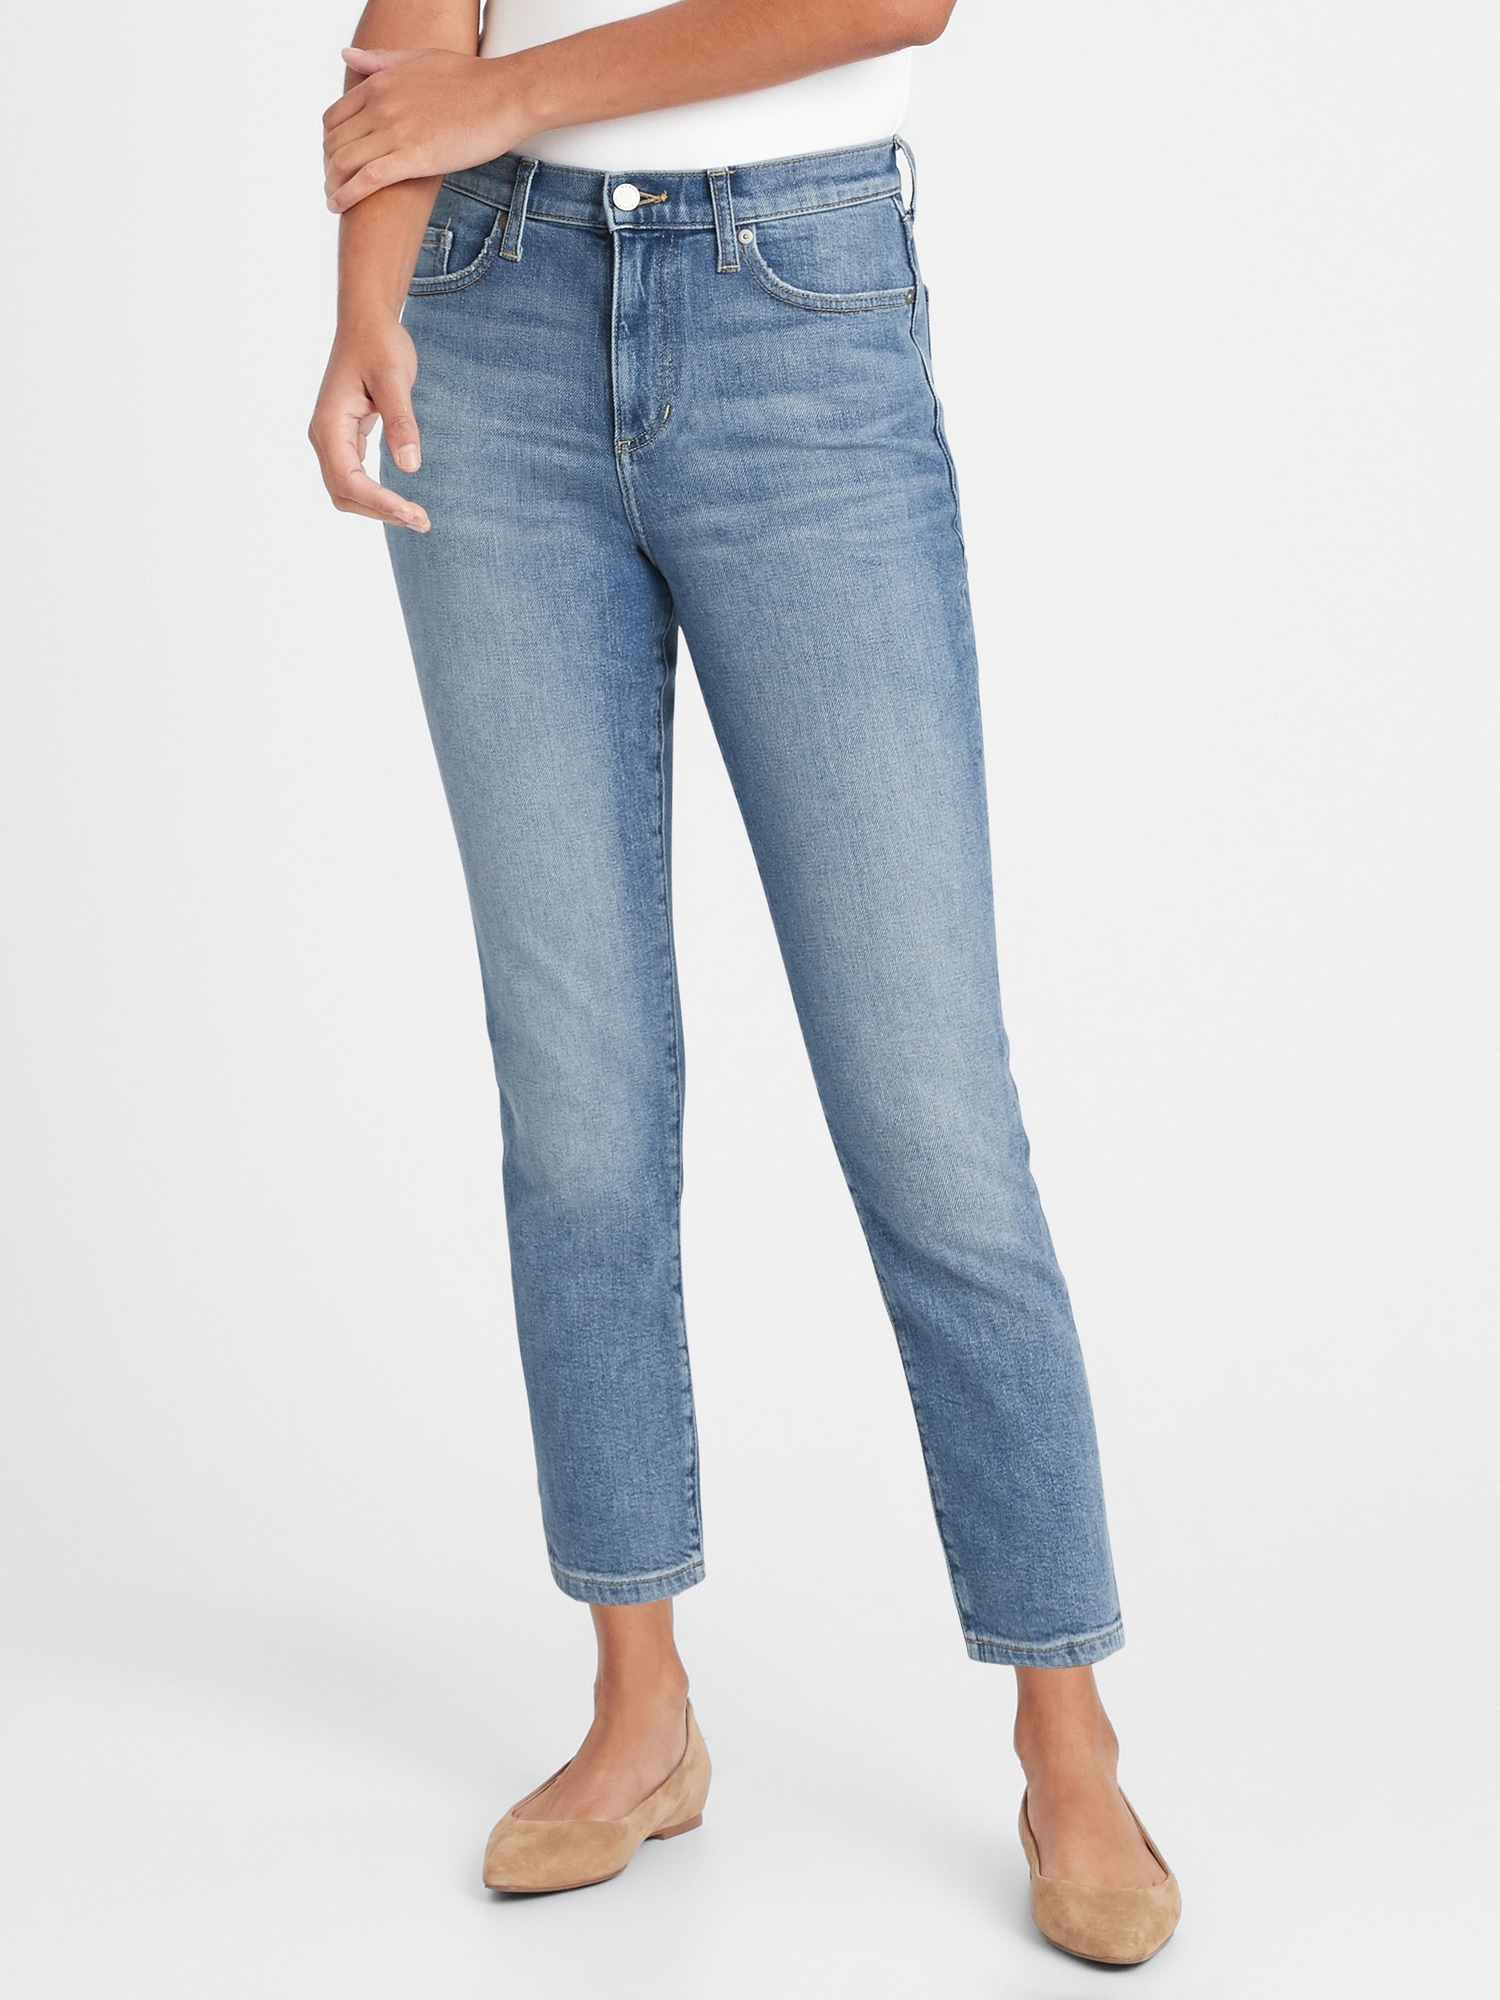 high rise jeans